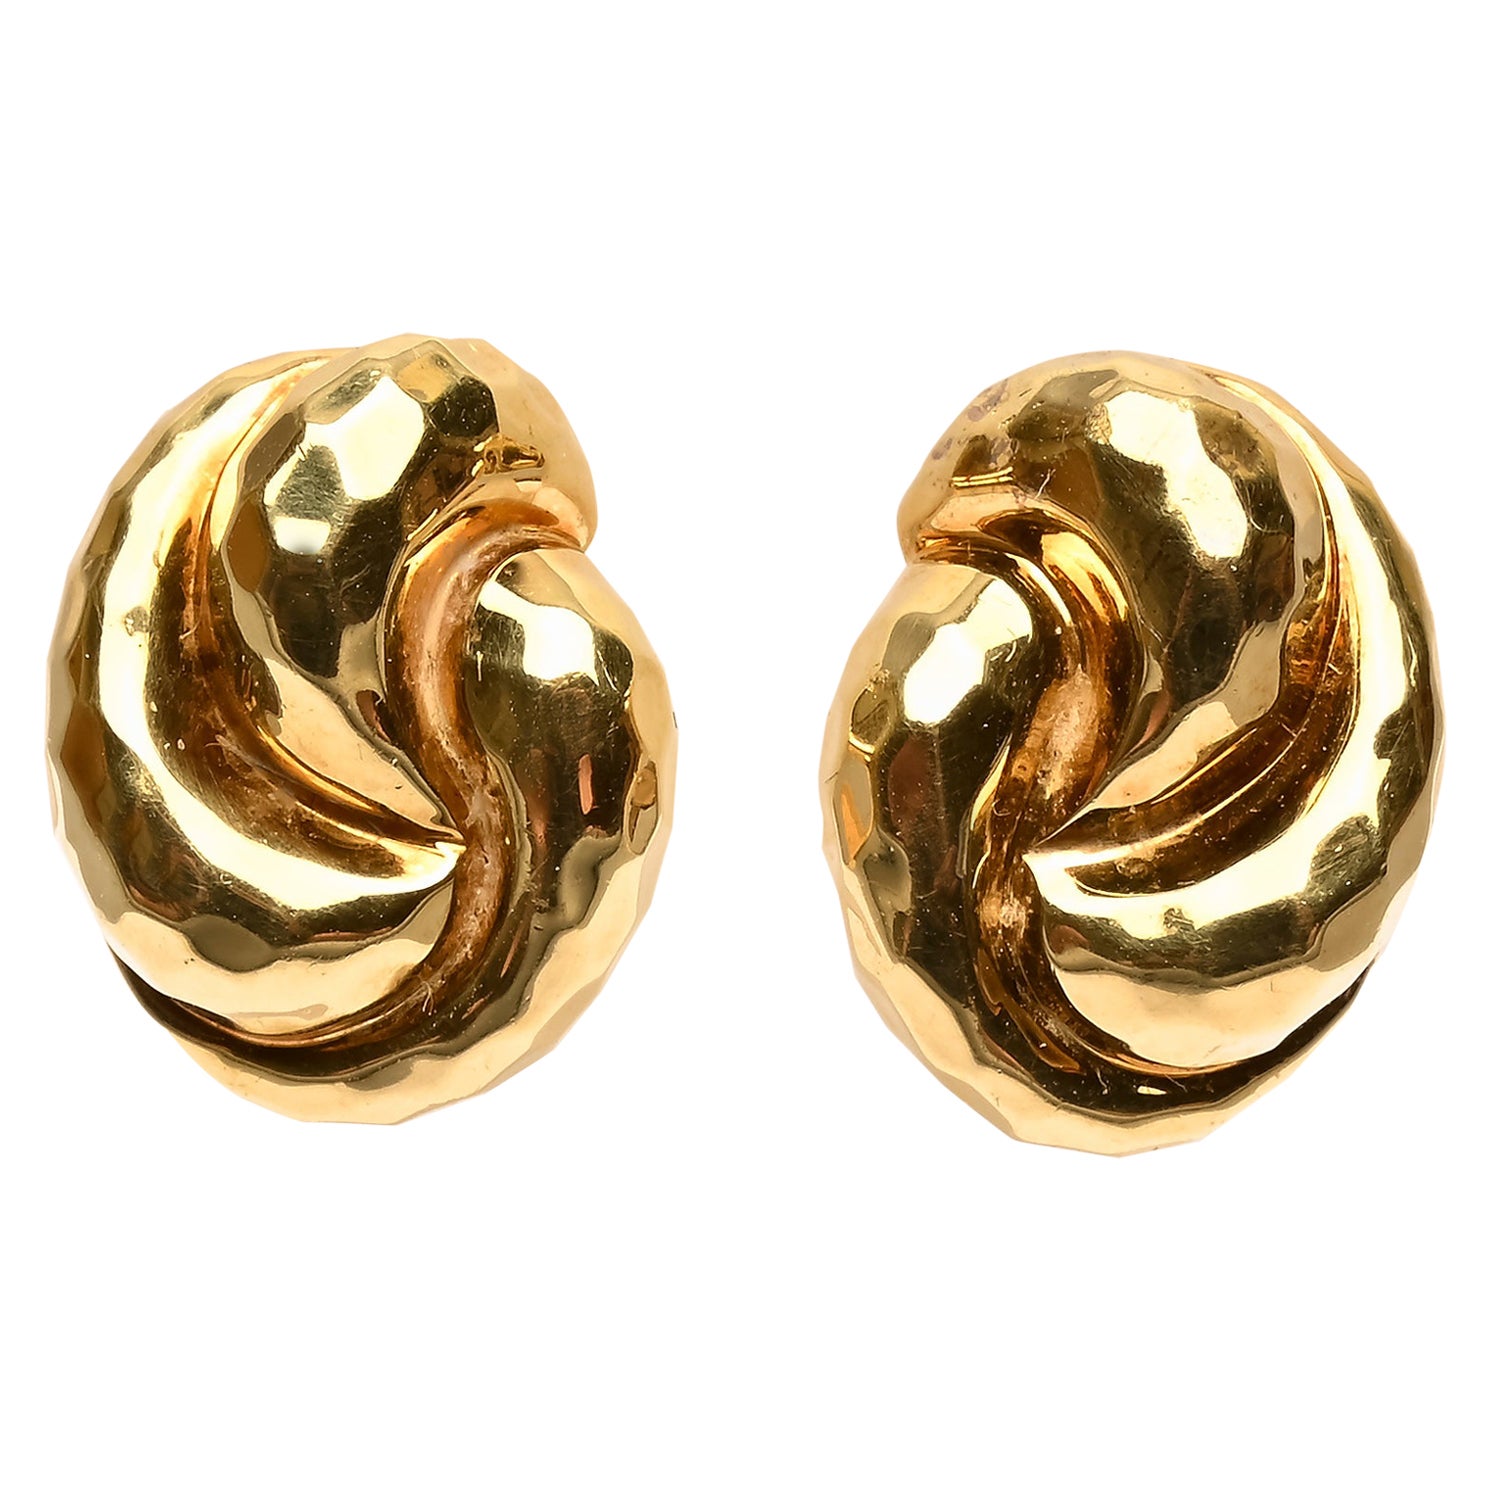 Henry Dunay Small Knot Earrings